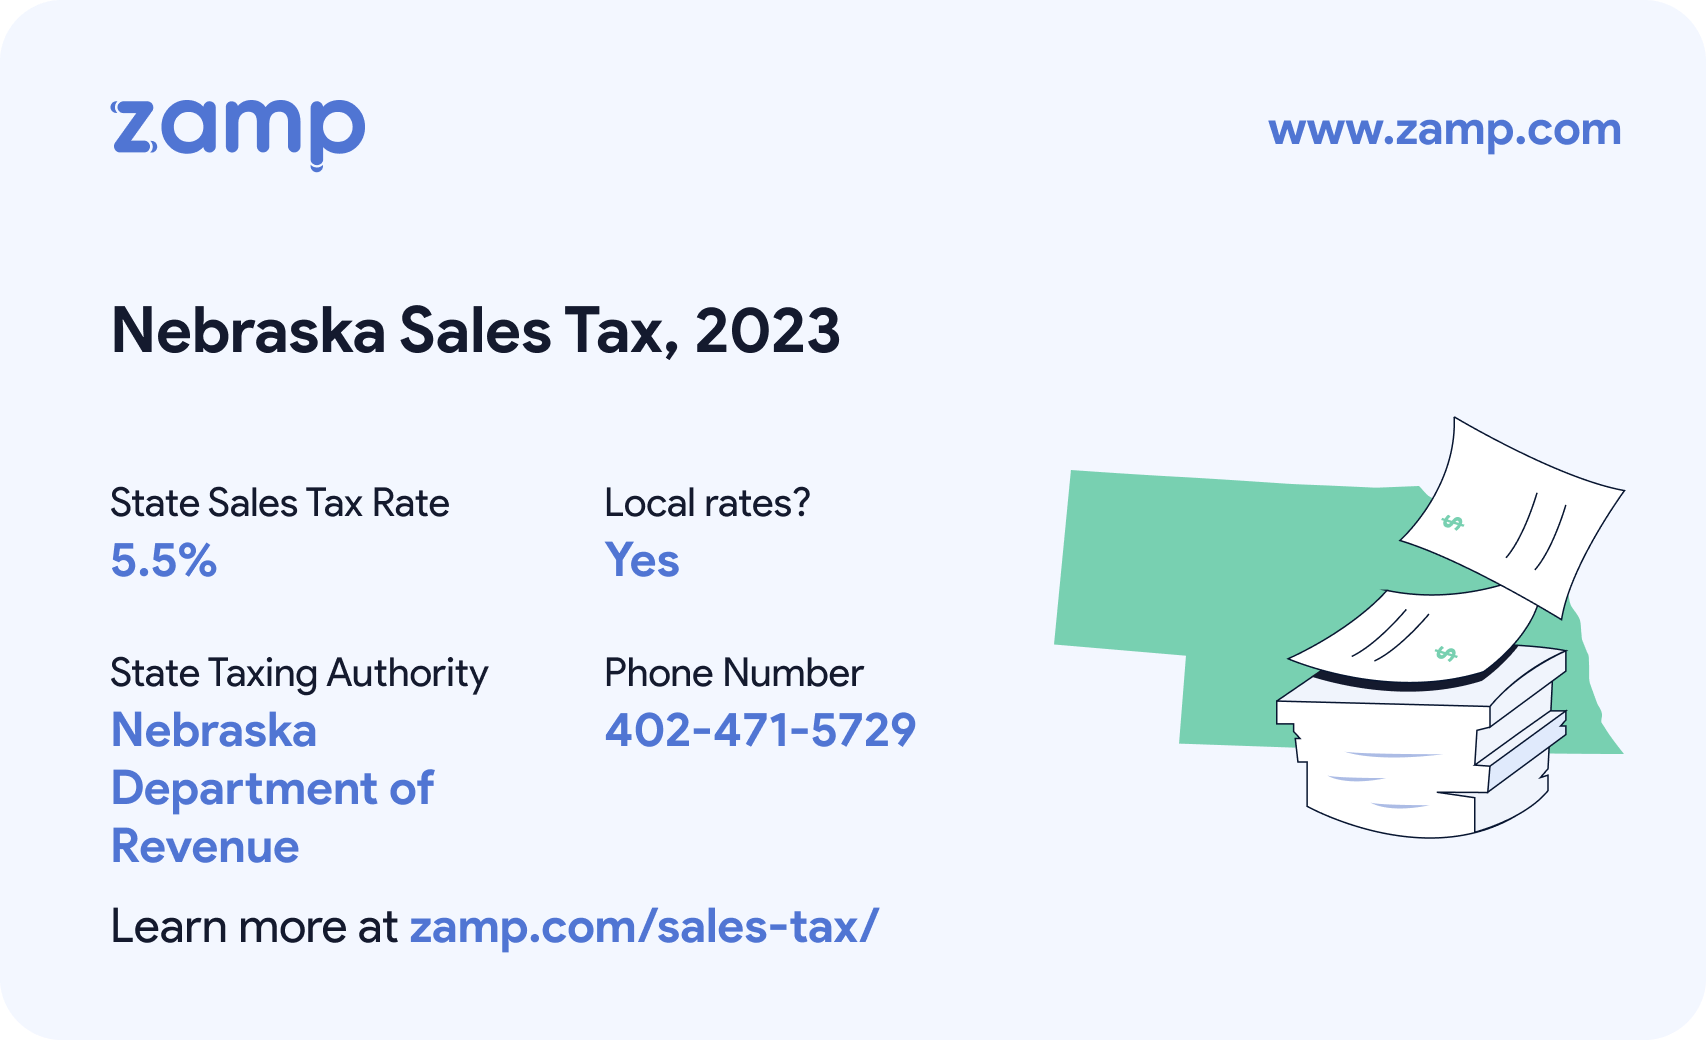 Nebraska basic sales tax info for 2023 - State sales tax rate: 5.5%, Local rates? Yes; State Taxing Authority: Nebraska Department of Revenue; and phone number 402-471-5729